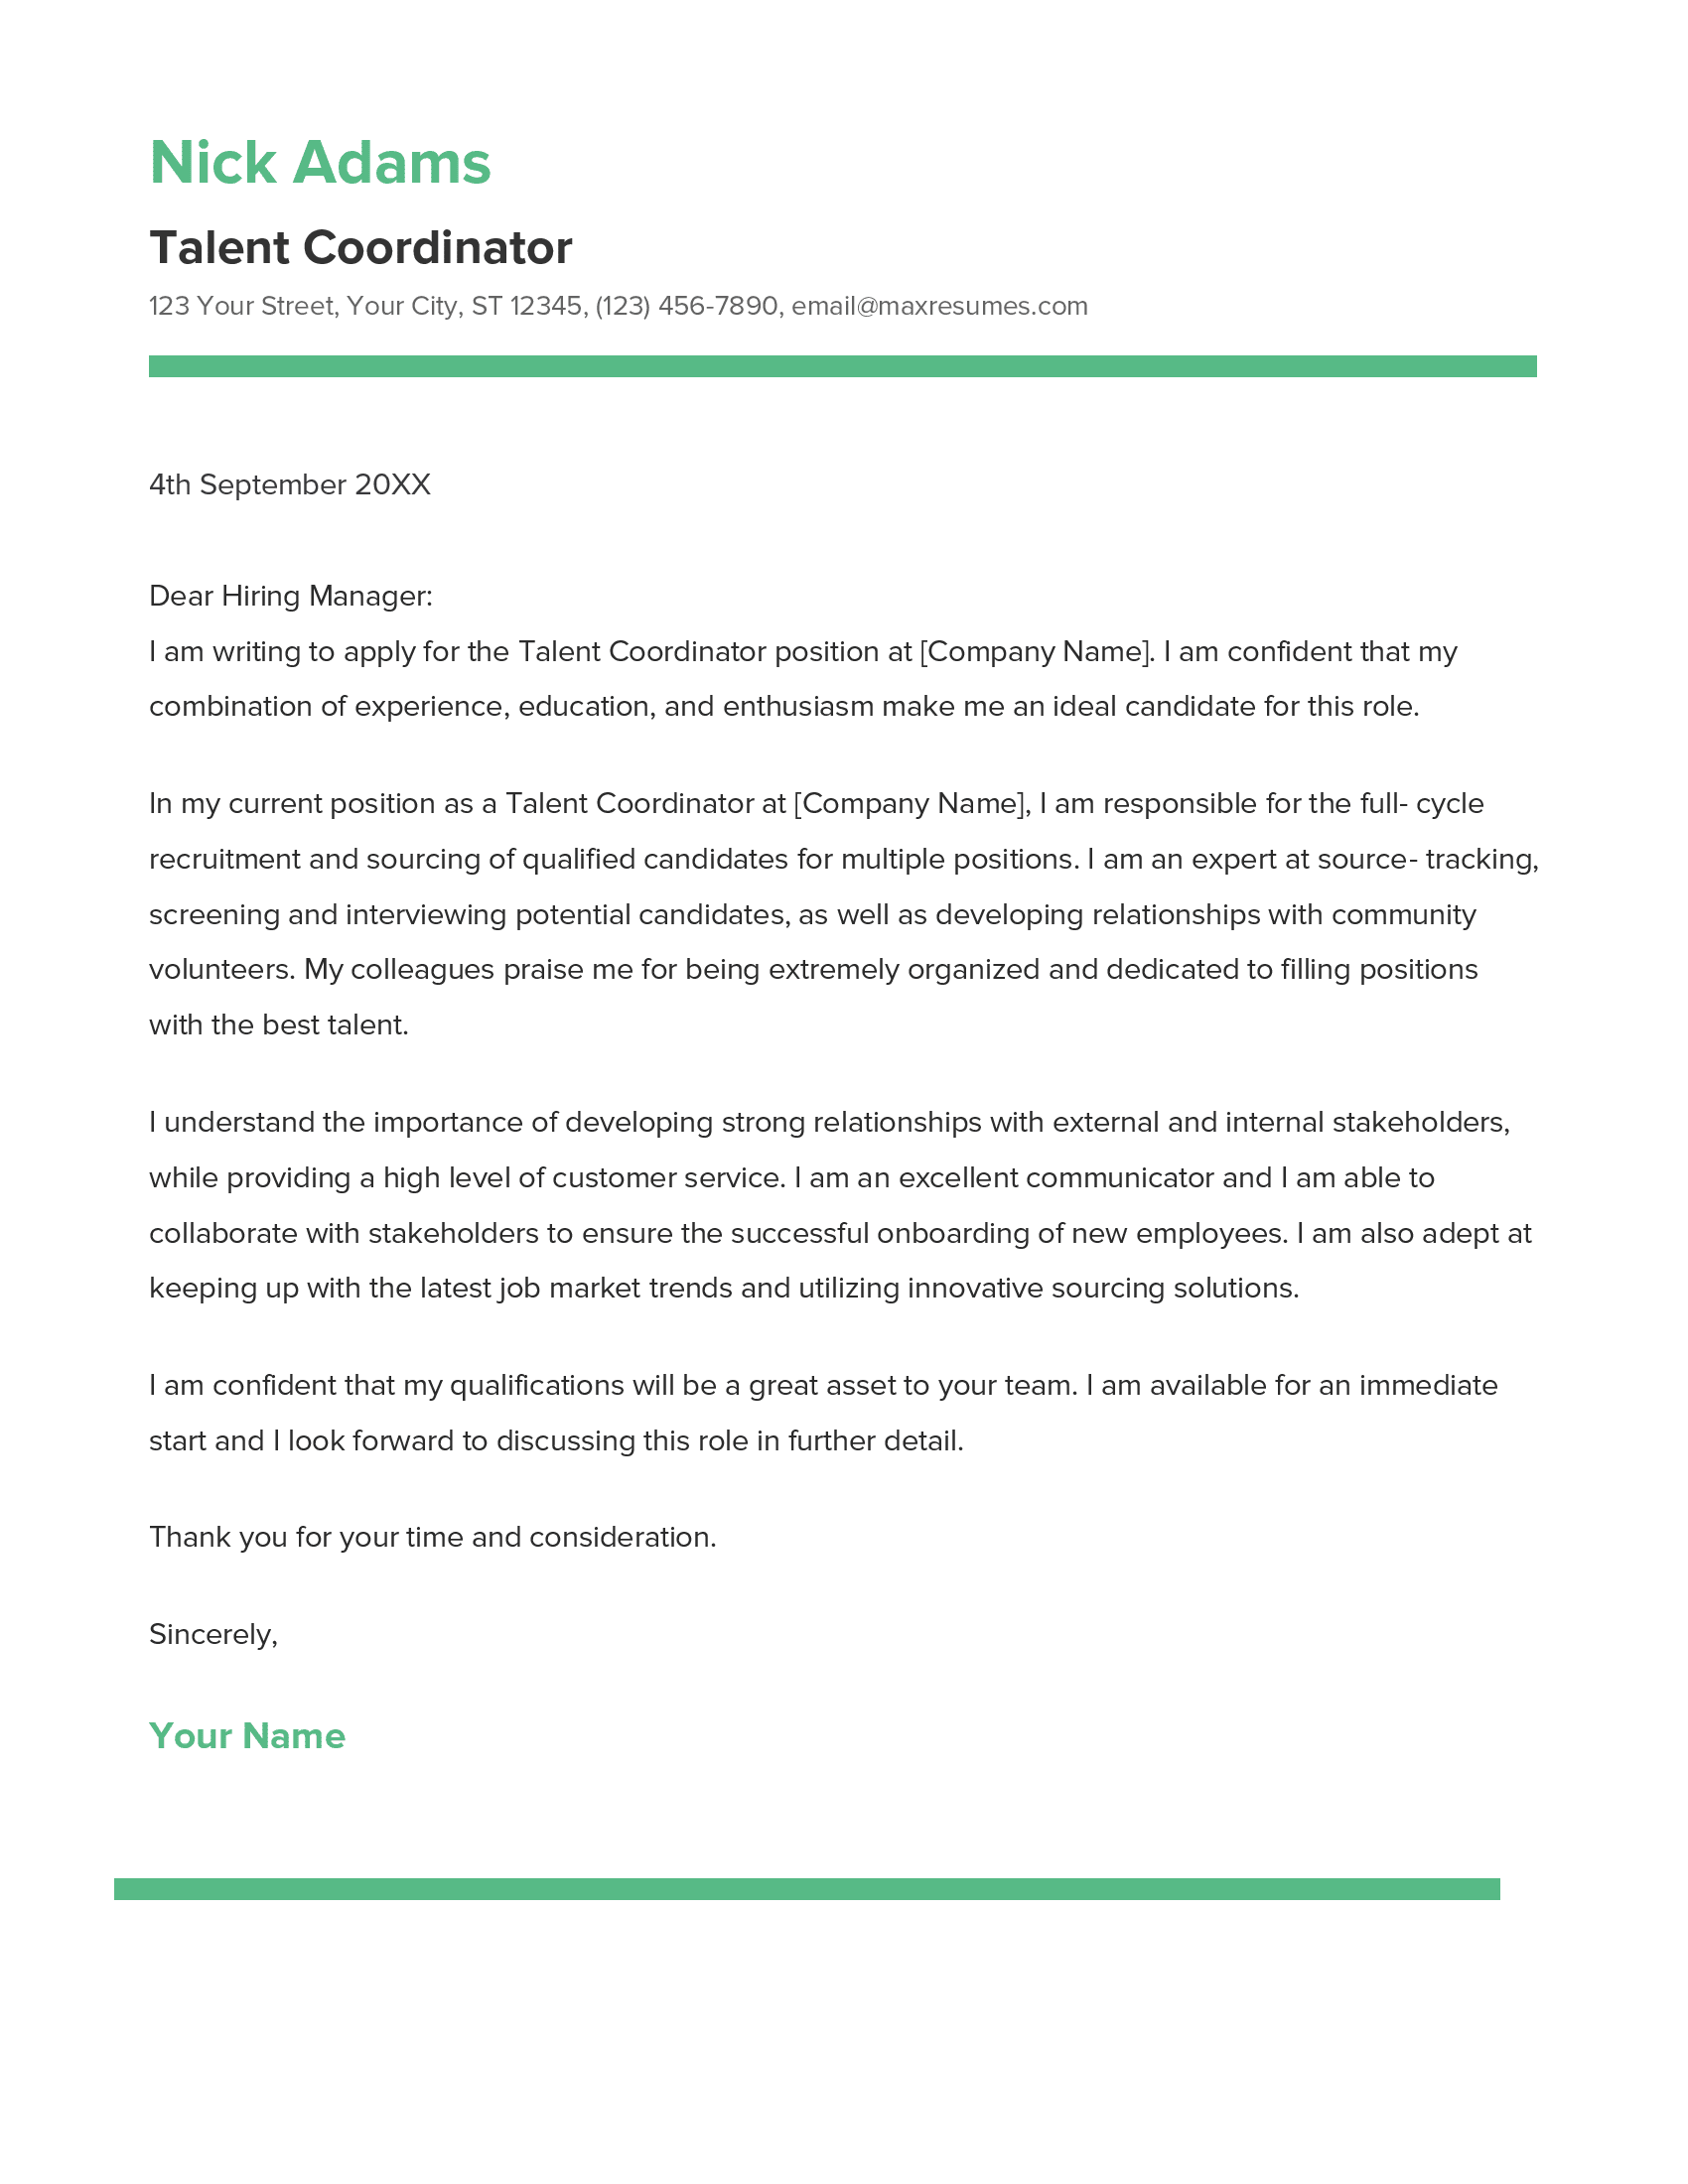 Talent Coordinator Cover Letter Example